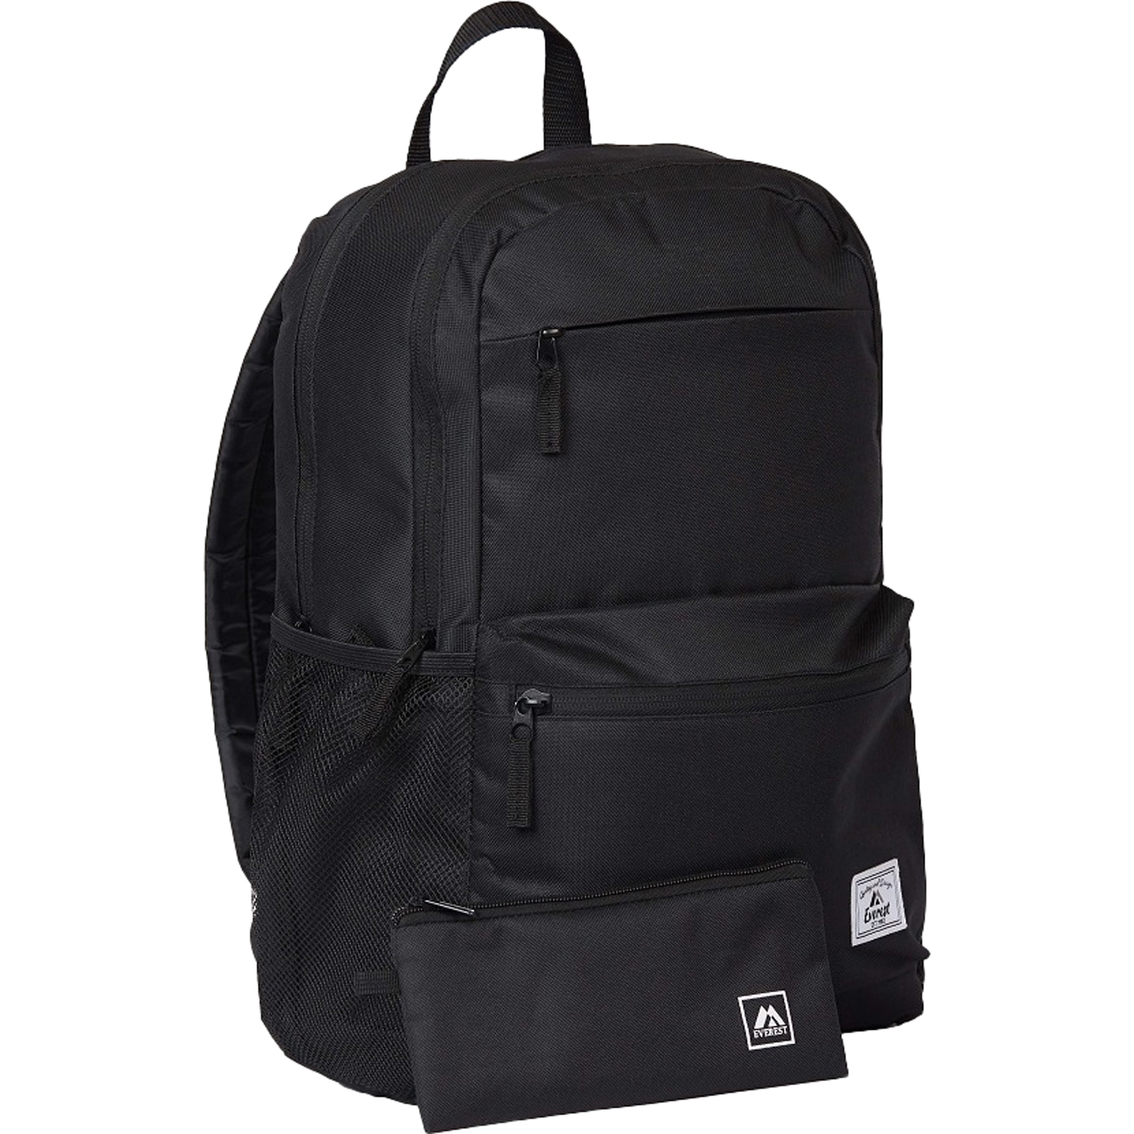 Everest Modern Laptop Backpack | Computer Bags & Cases | Electronics ...